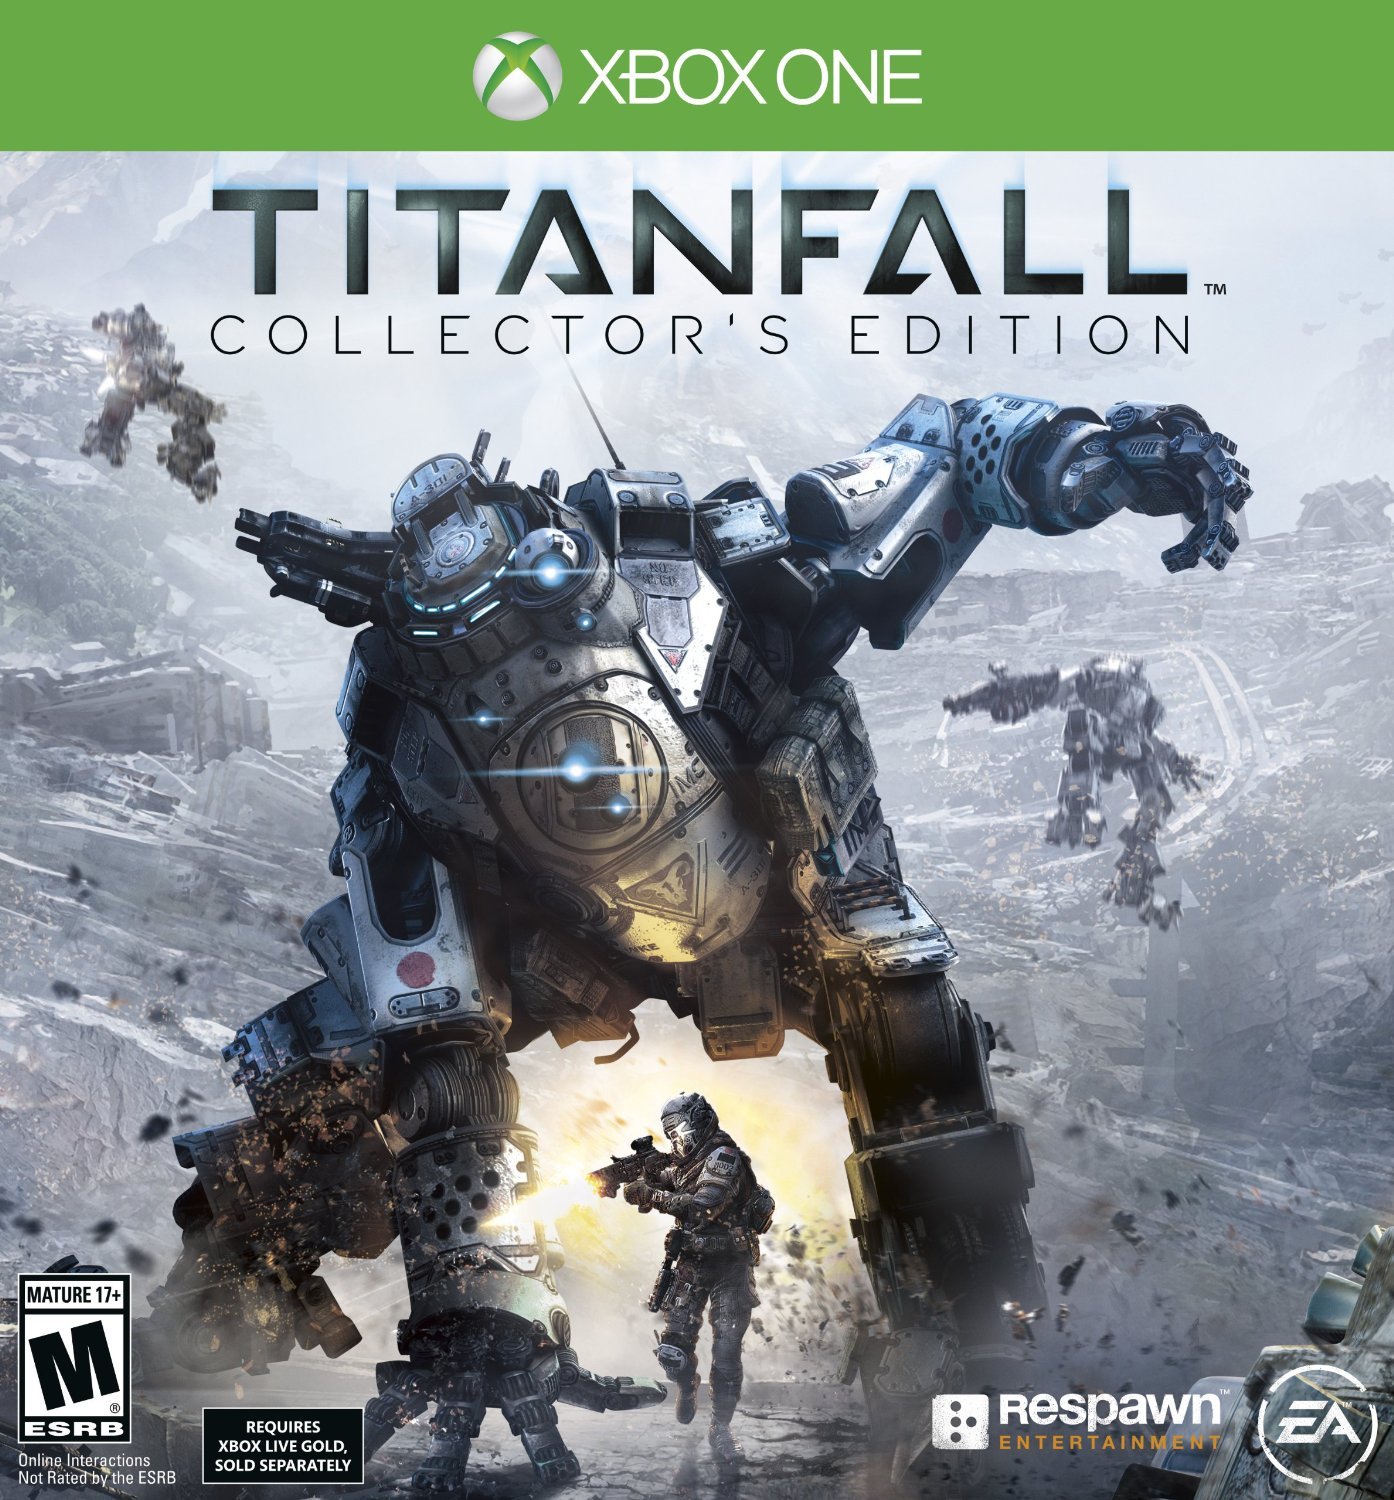 Titanfall Collector's Edition - Collector's Edition - Xbox One - image 1 of 9